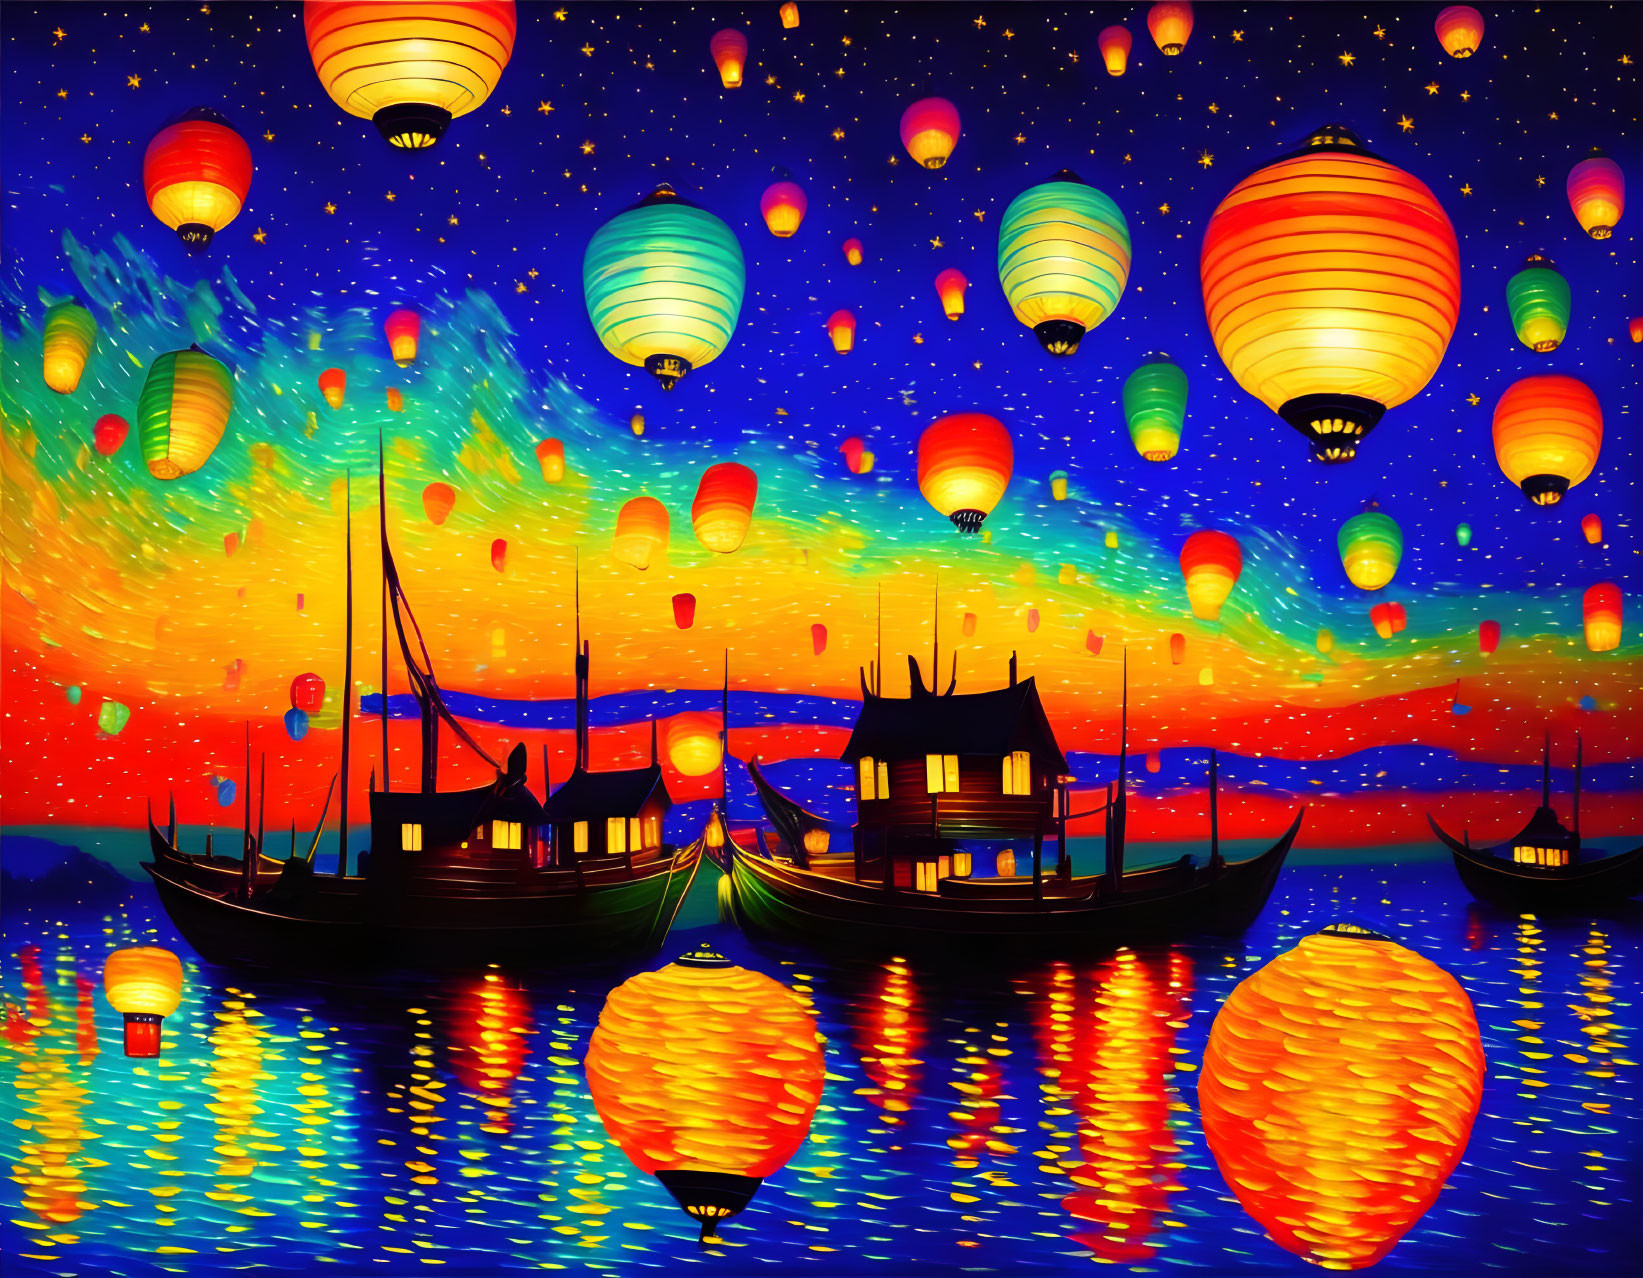 Dance of the Paper Lanterns